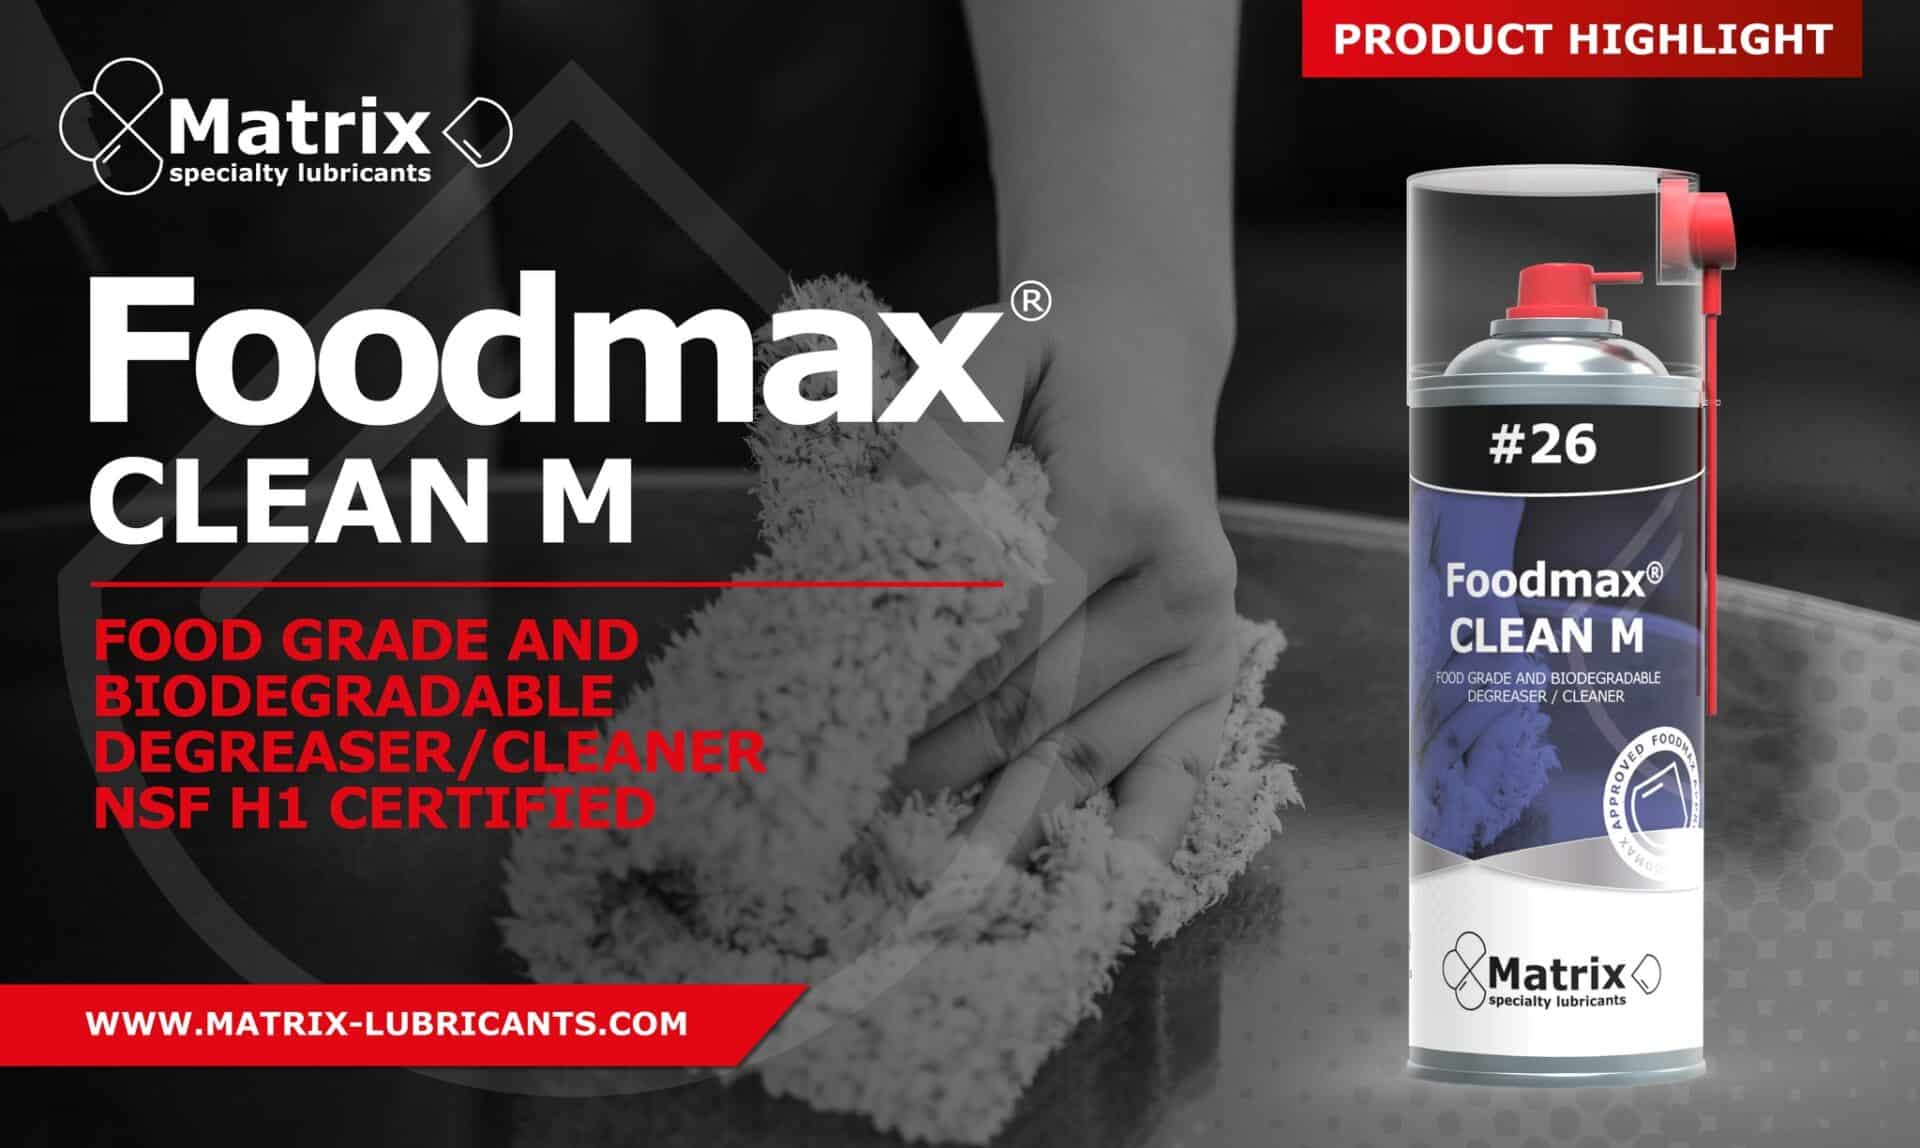 Matrix specialty lubricants' Foodmax Clean M food grade and biodegradable degreaser/cleaner